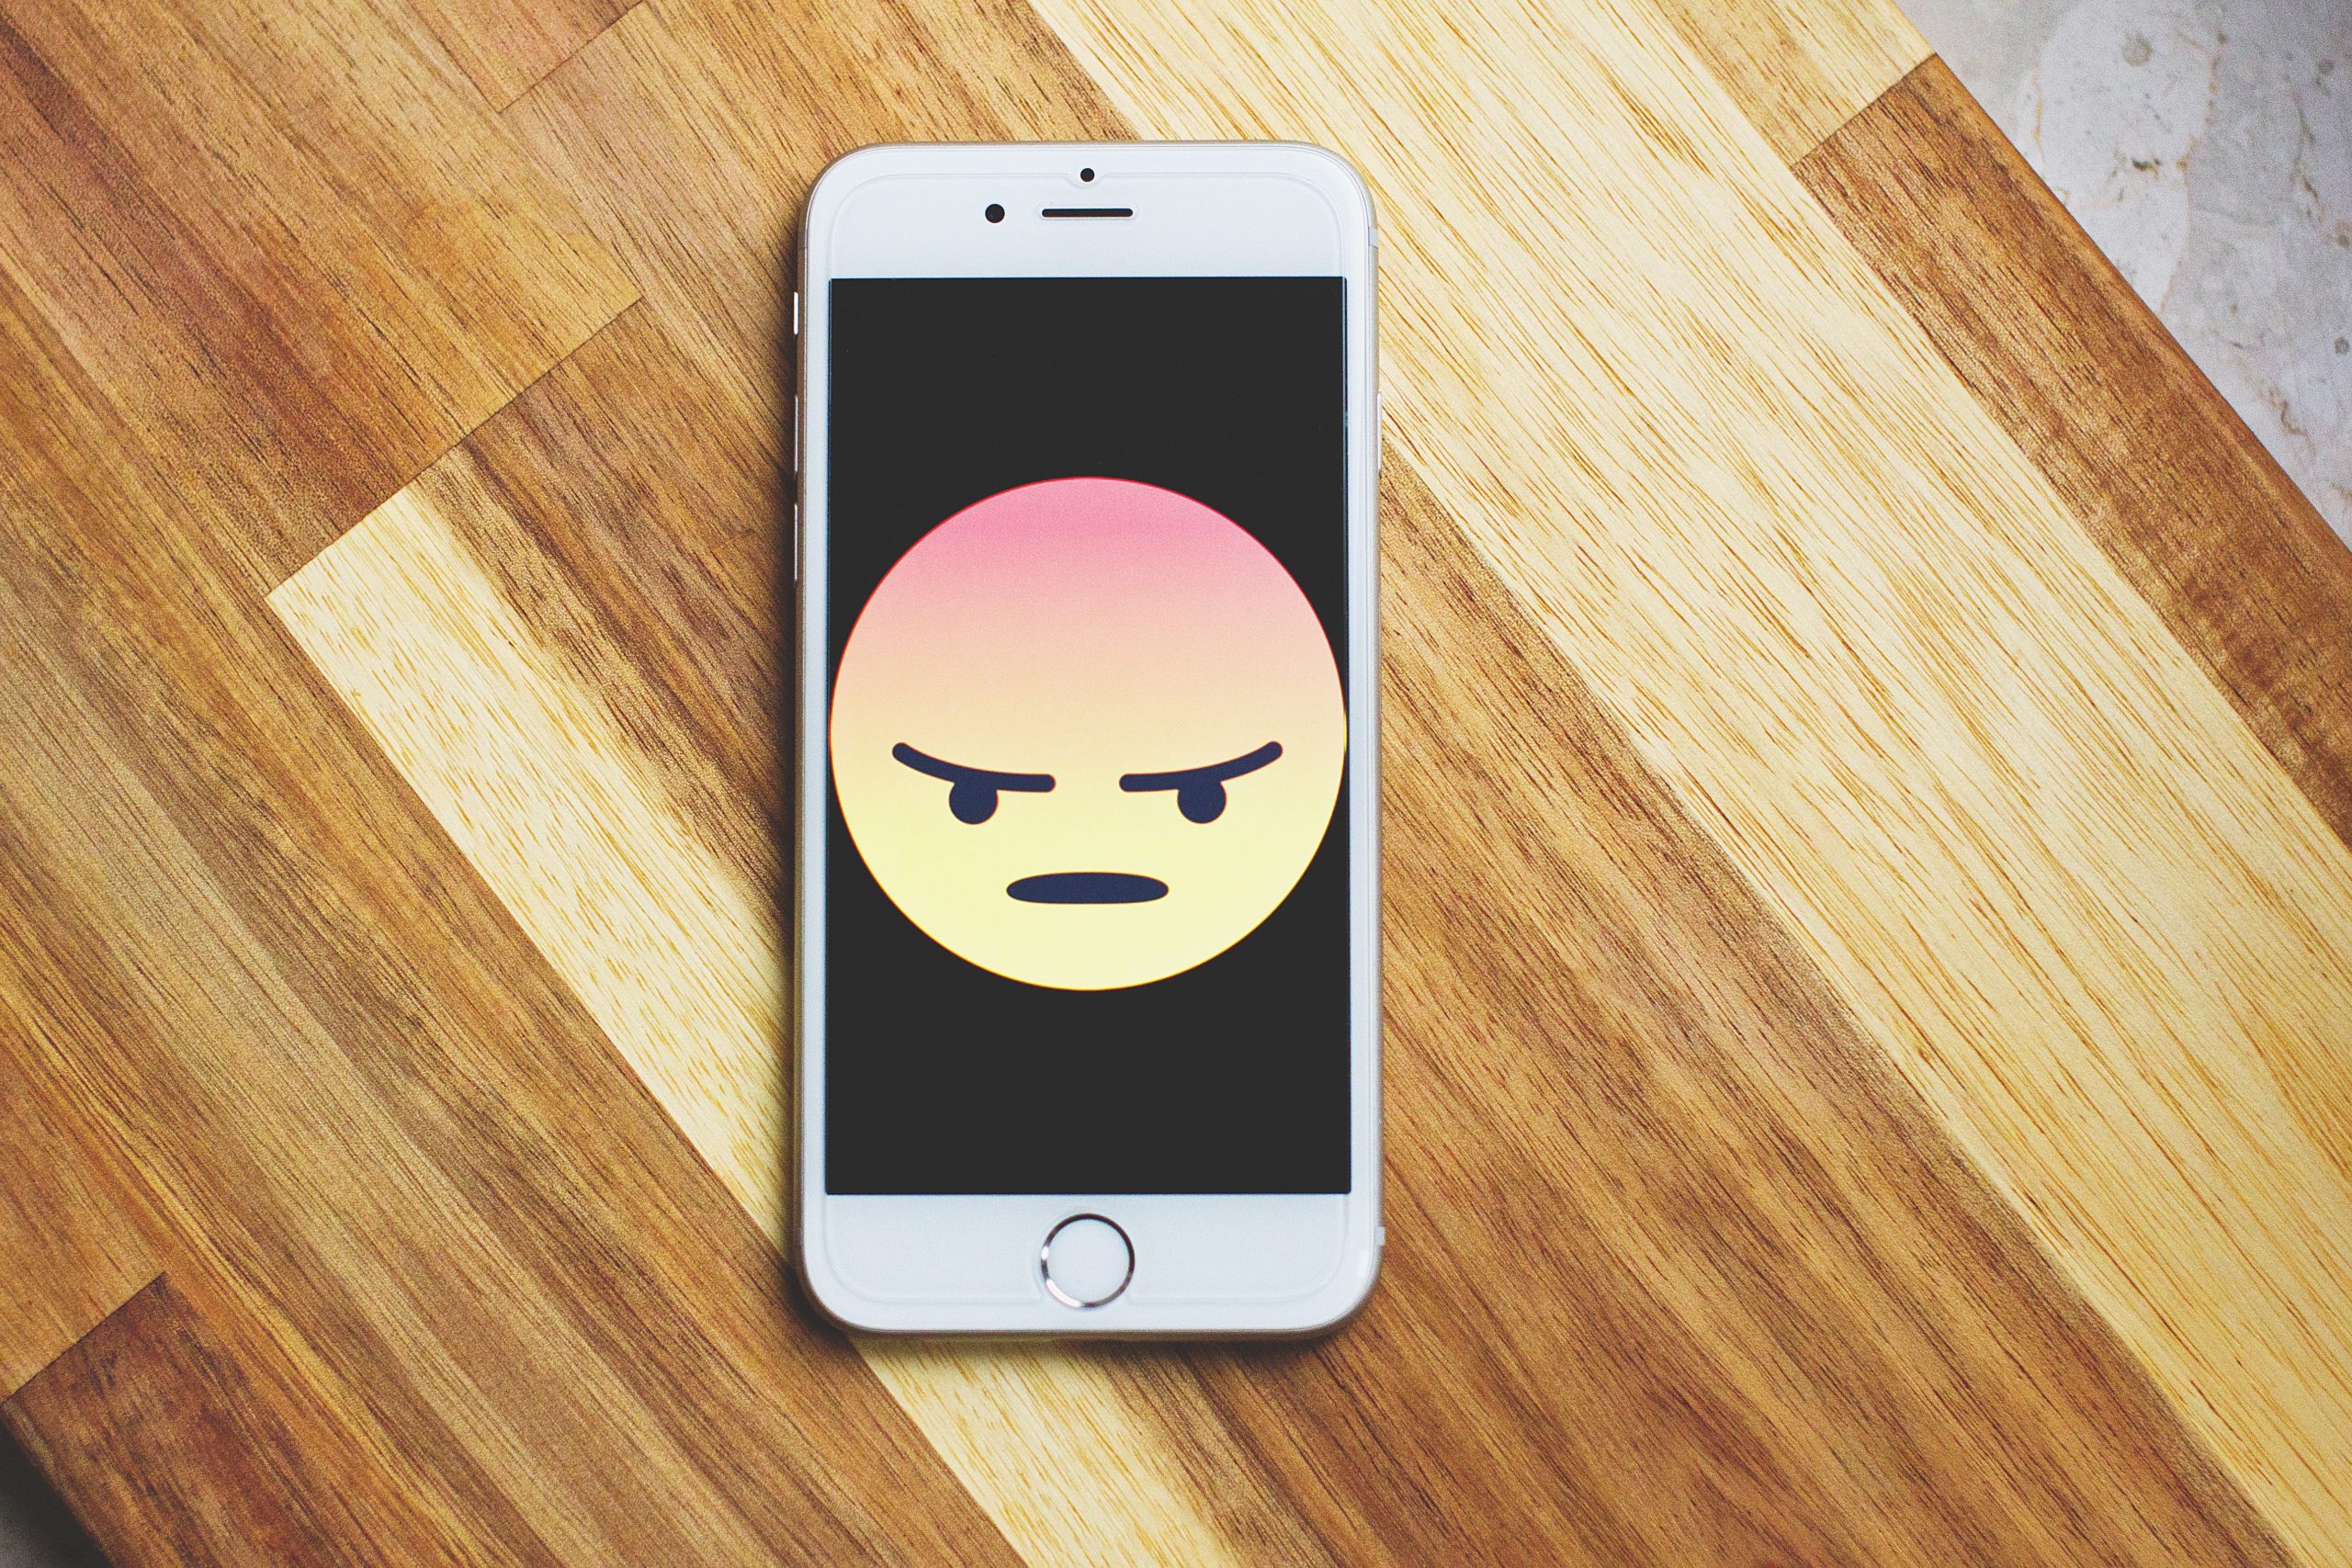 Smart phone displaying the angry face emoji